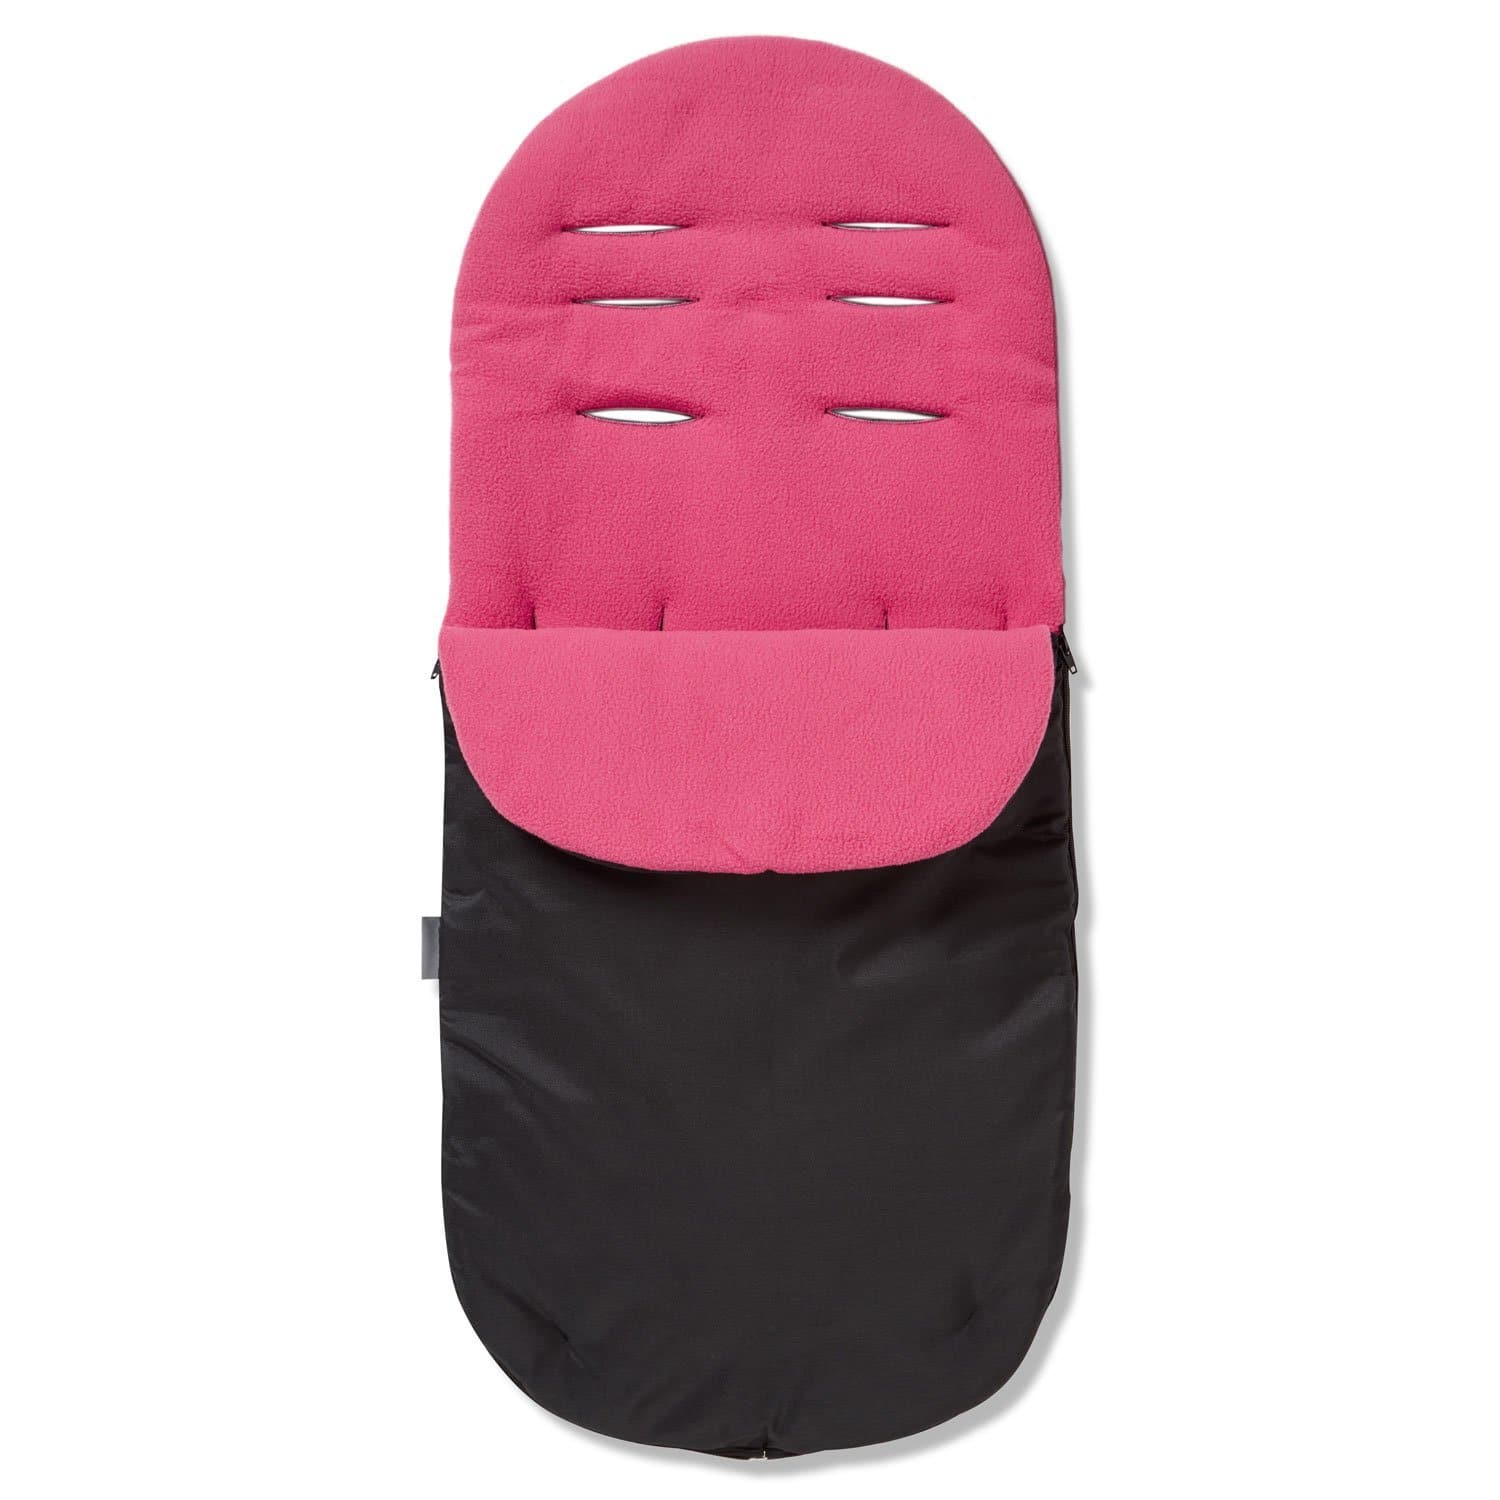 Footmuff / Cosy Toes Compatible with Quinny - For Your Little One